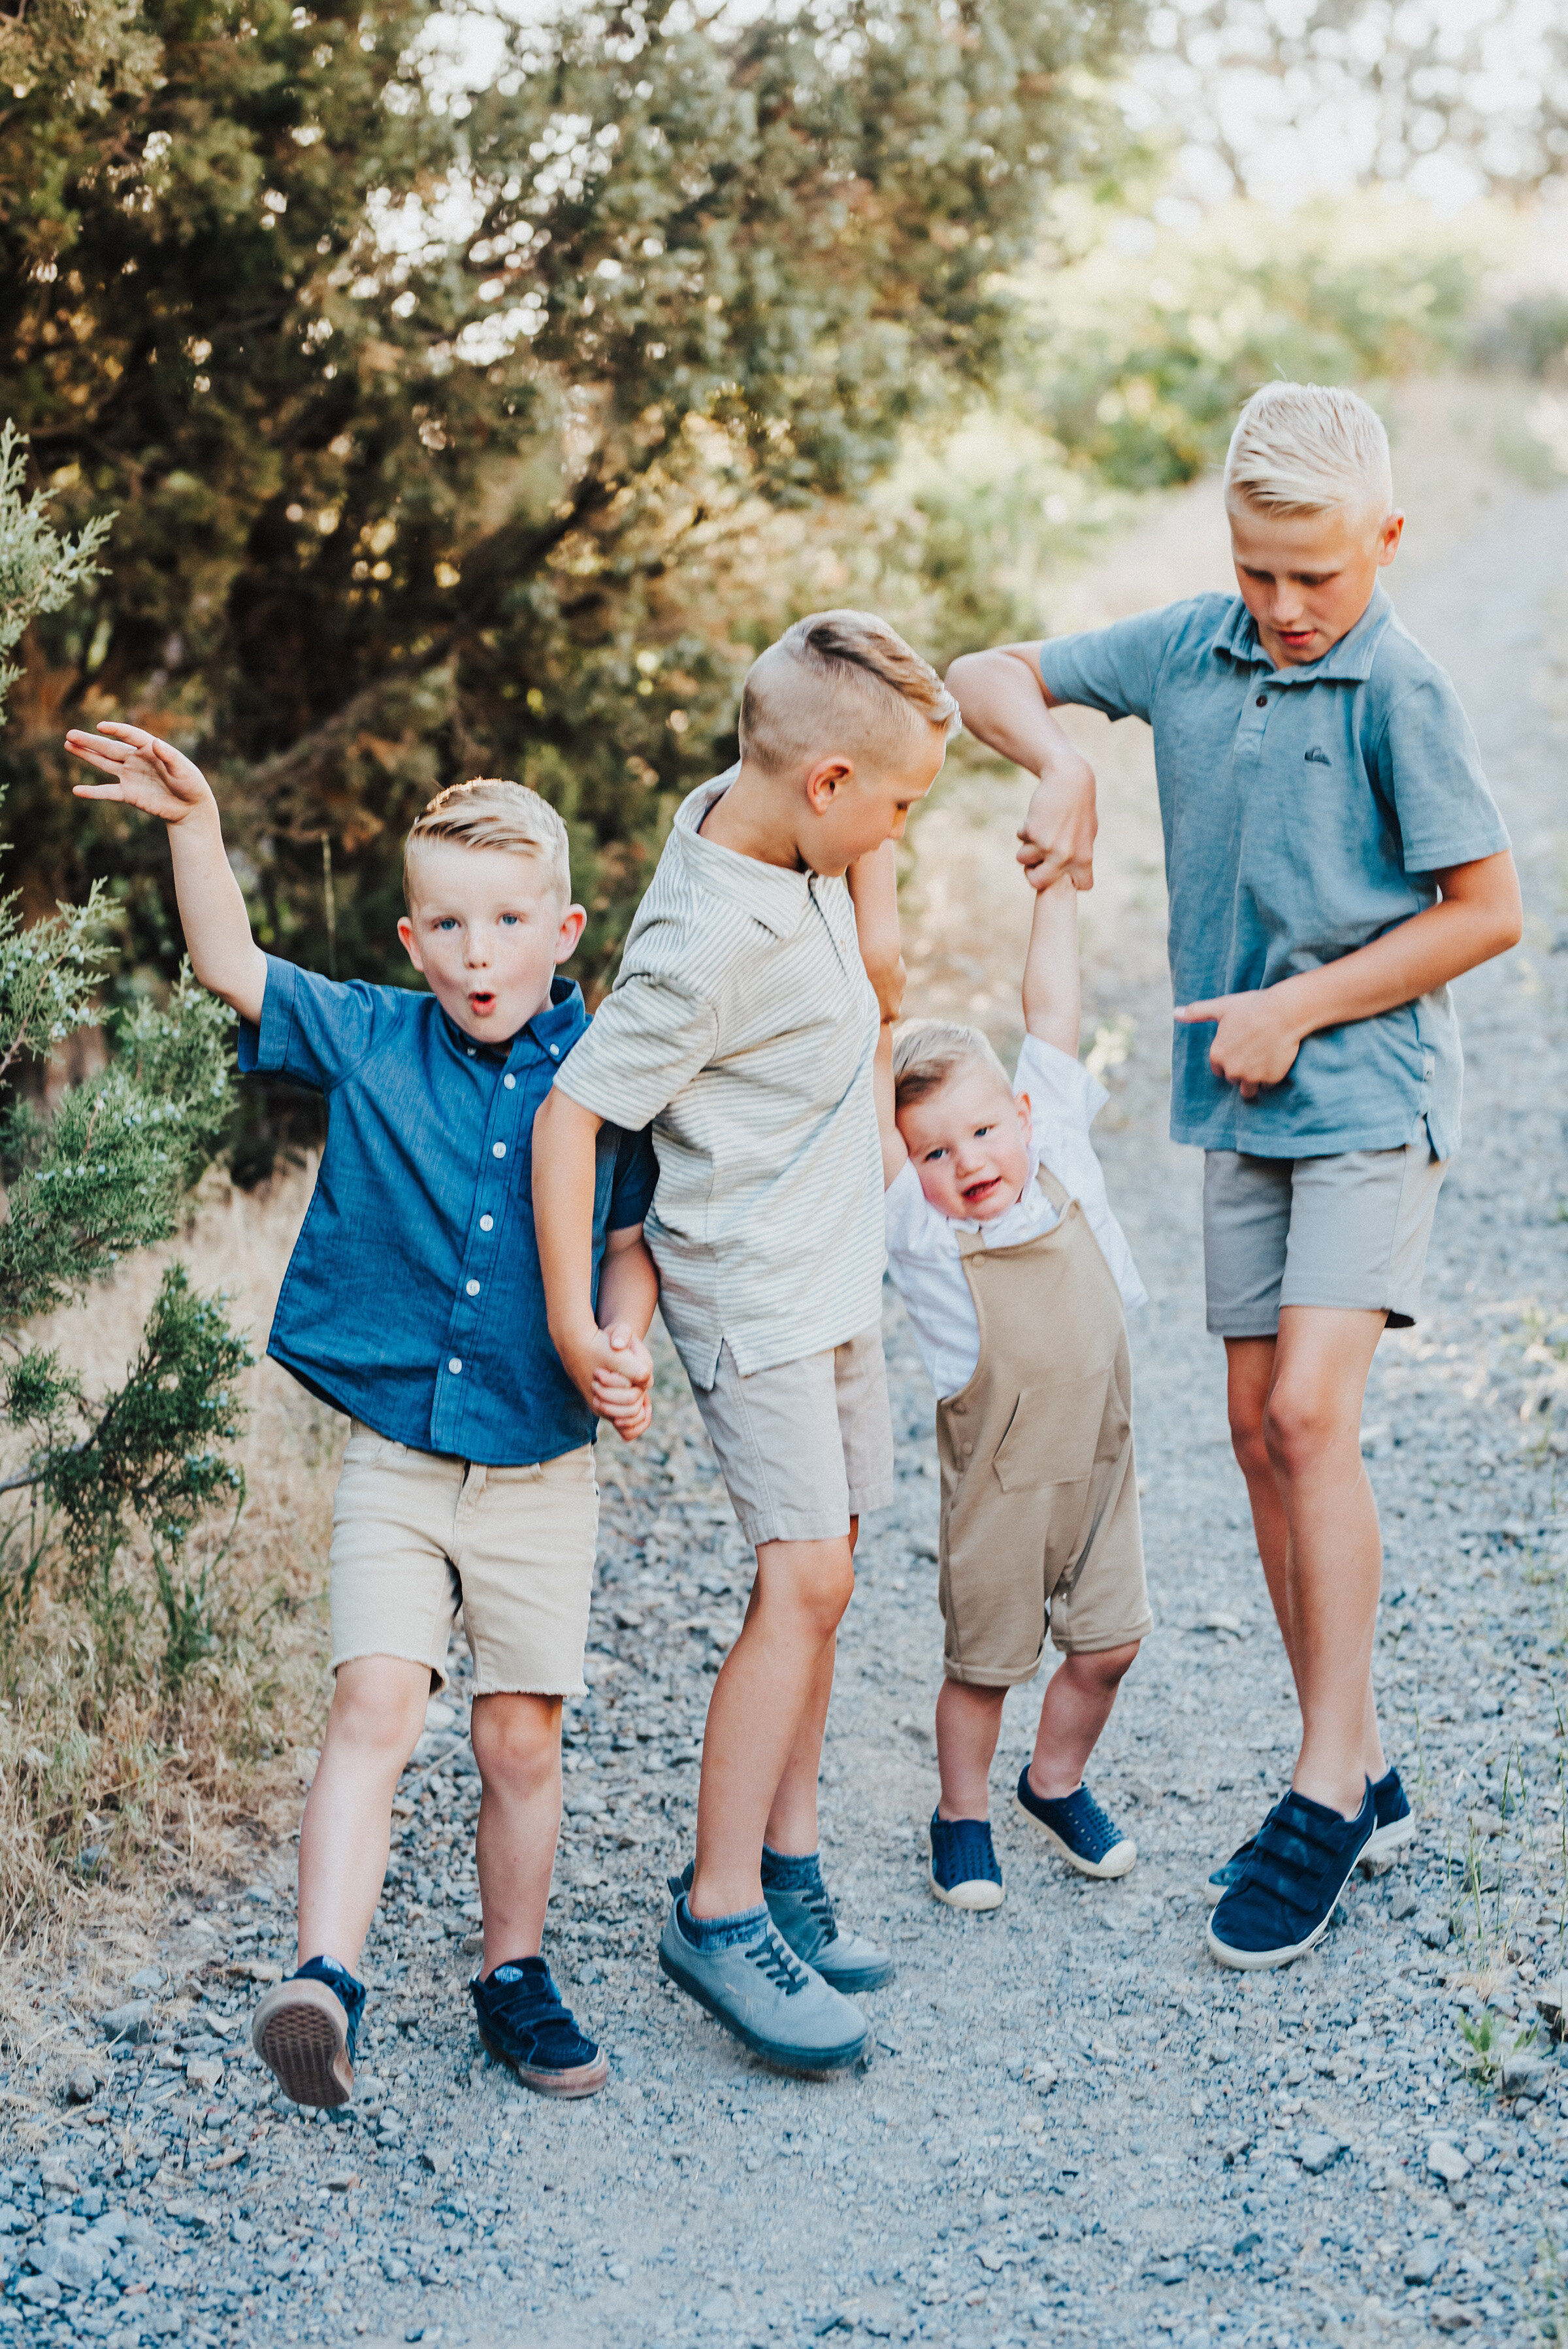  The young brothers all strike various poses while on a trodden path in the canyon. Light blue and khakis soft outdoor setting two boys life youngest boy silly faces #providencecanyon #utahphotography #utah #familyphoto #family #familyphotography #familyphotographer #photography #love #familytime #familyphotoshoot #familyportrait #familyfirst #photooftheday #familyphotos #photographer 